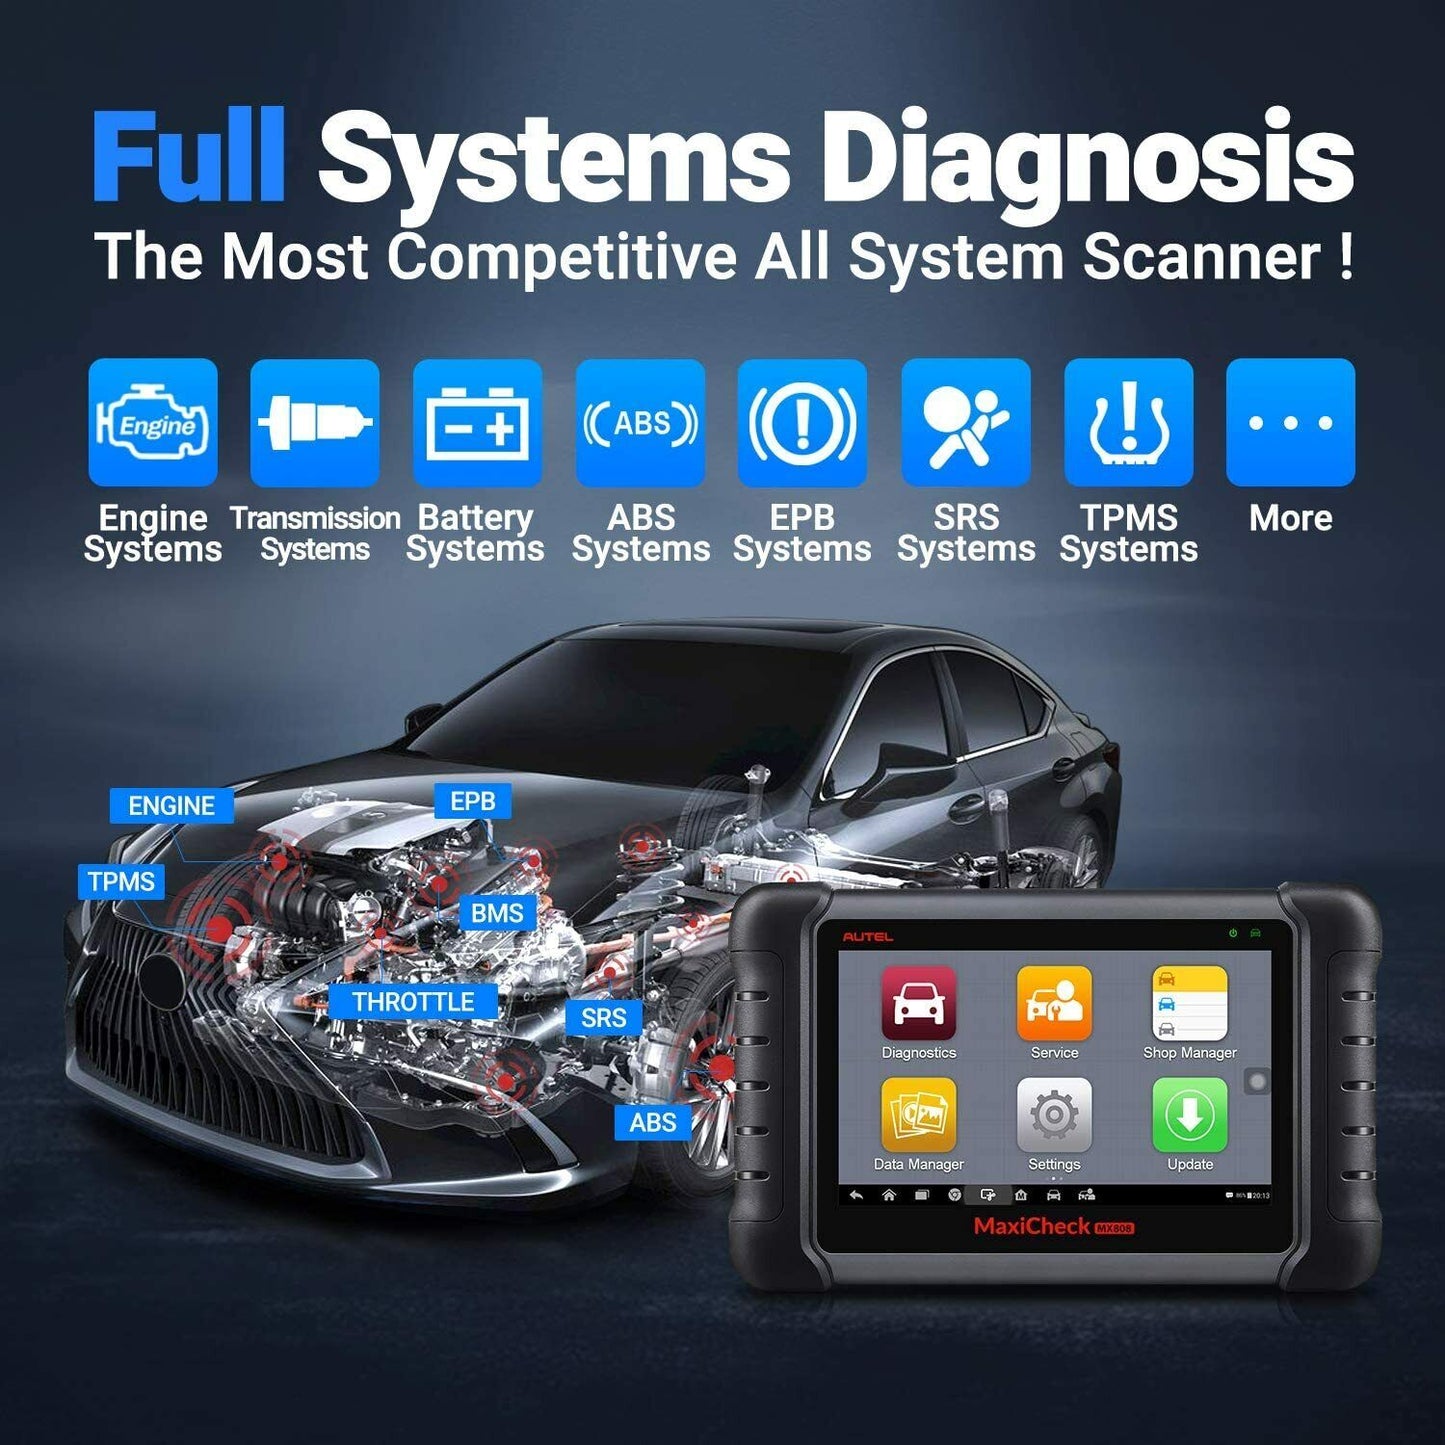 2022 Autel MaxiCheck MX808 Full System Diagnostic & Service Scan Tool Newly Adds Active Test